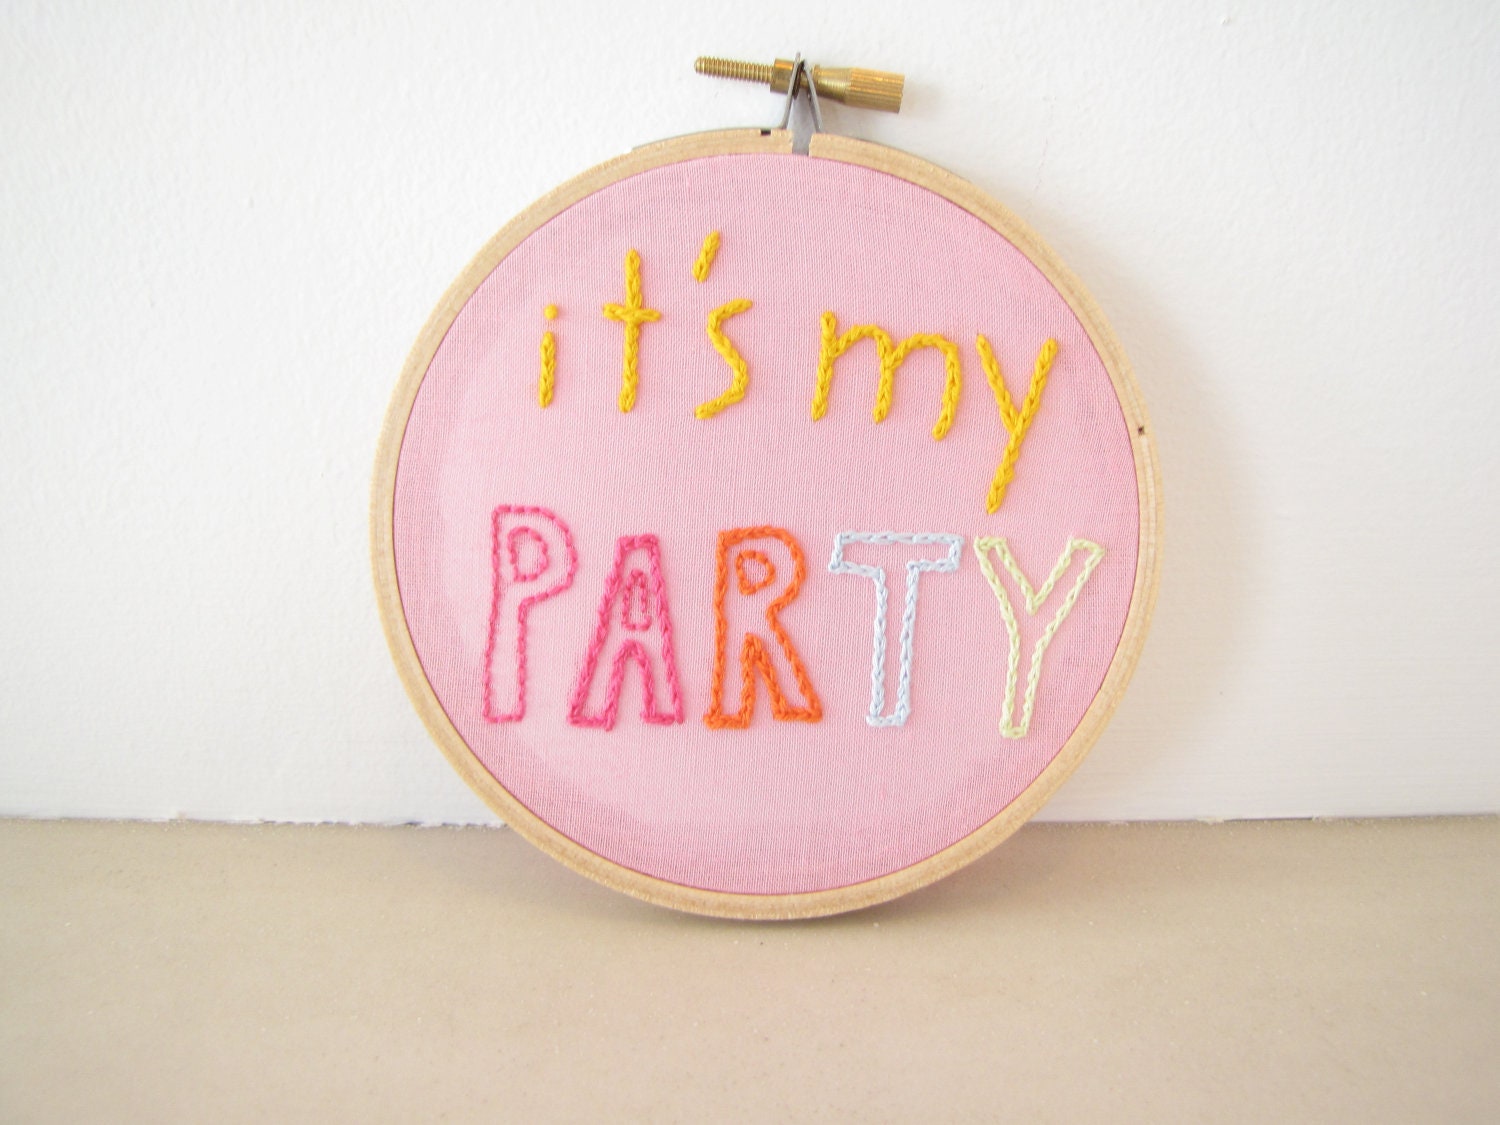 Embroidery Hoop Wall Art words "It's My Party" retro old school colorful pink, yellow, mint, sky blue, tangerine for Birthday or any day